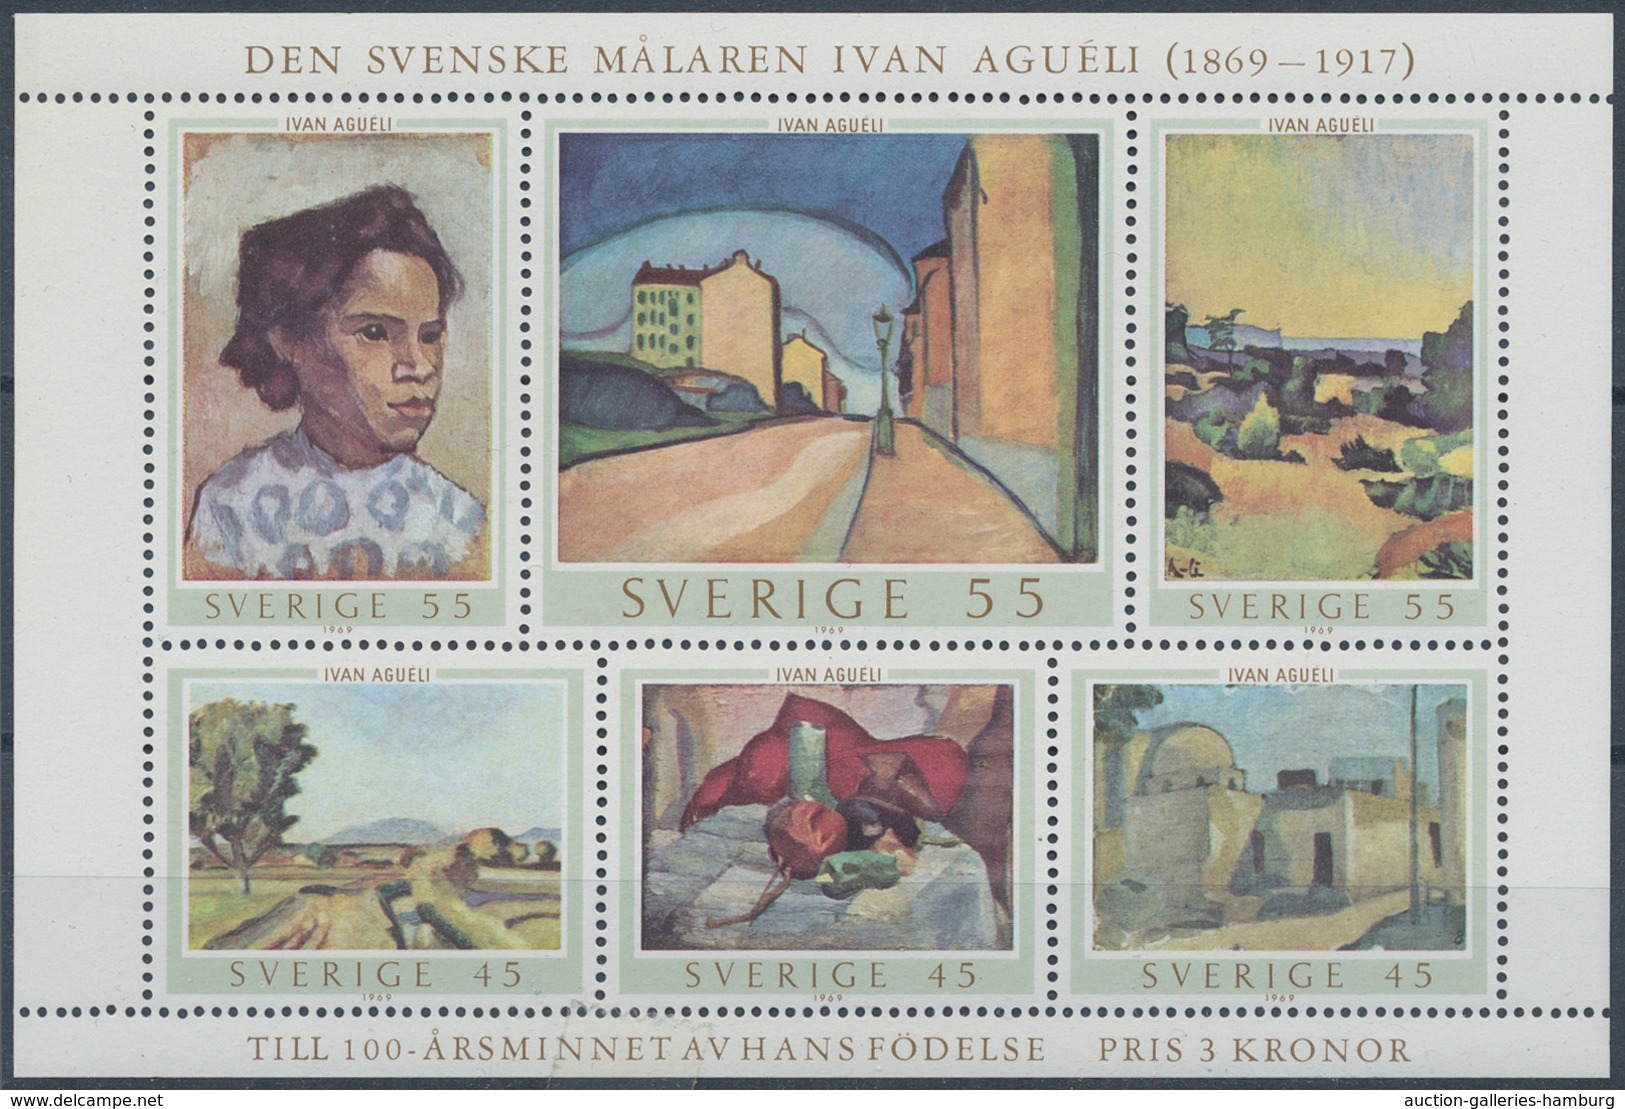 Schweden: 1960/1969, mostly complete year sets mint never hinged, a few perforation versions of defi